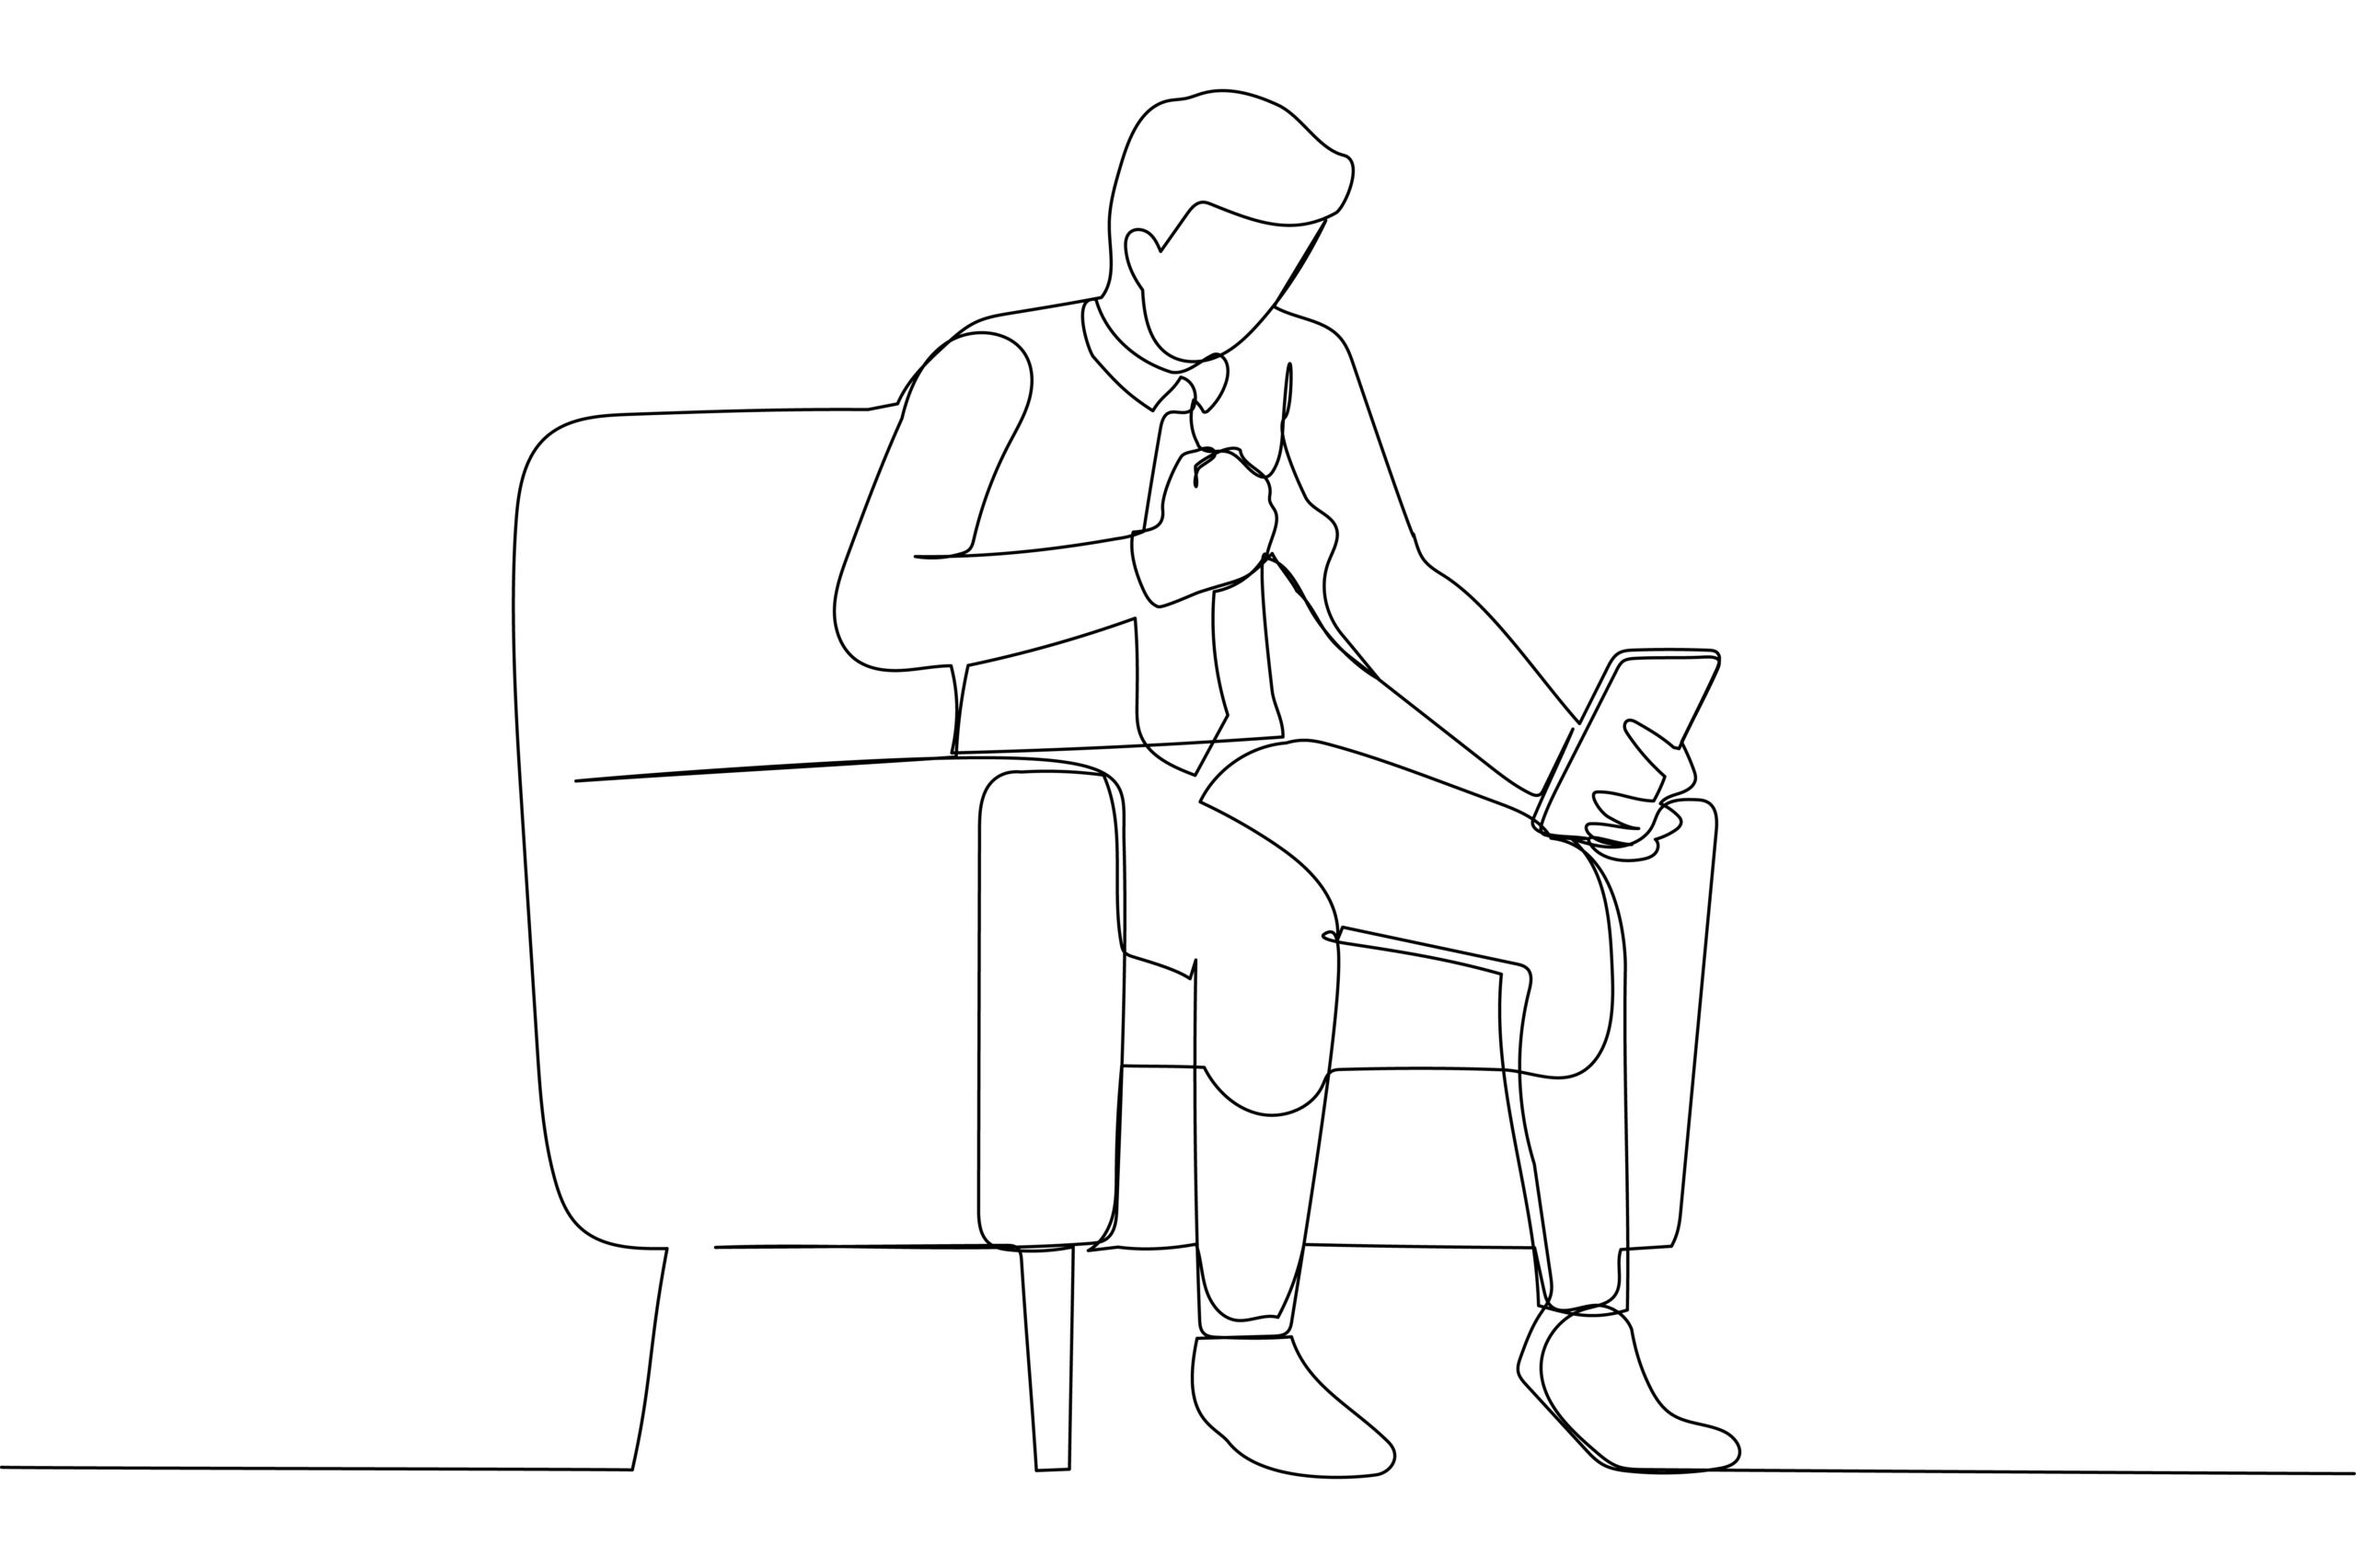 Black and white illustration of a person sitting on a couch holding a cell phone